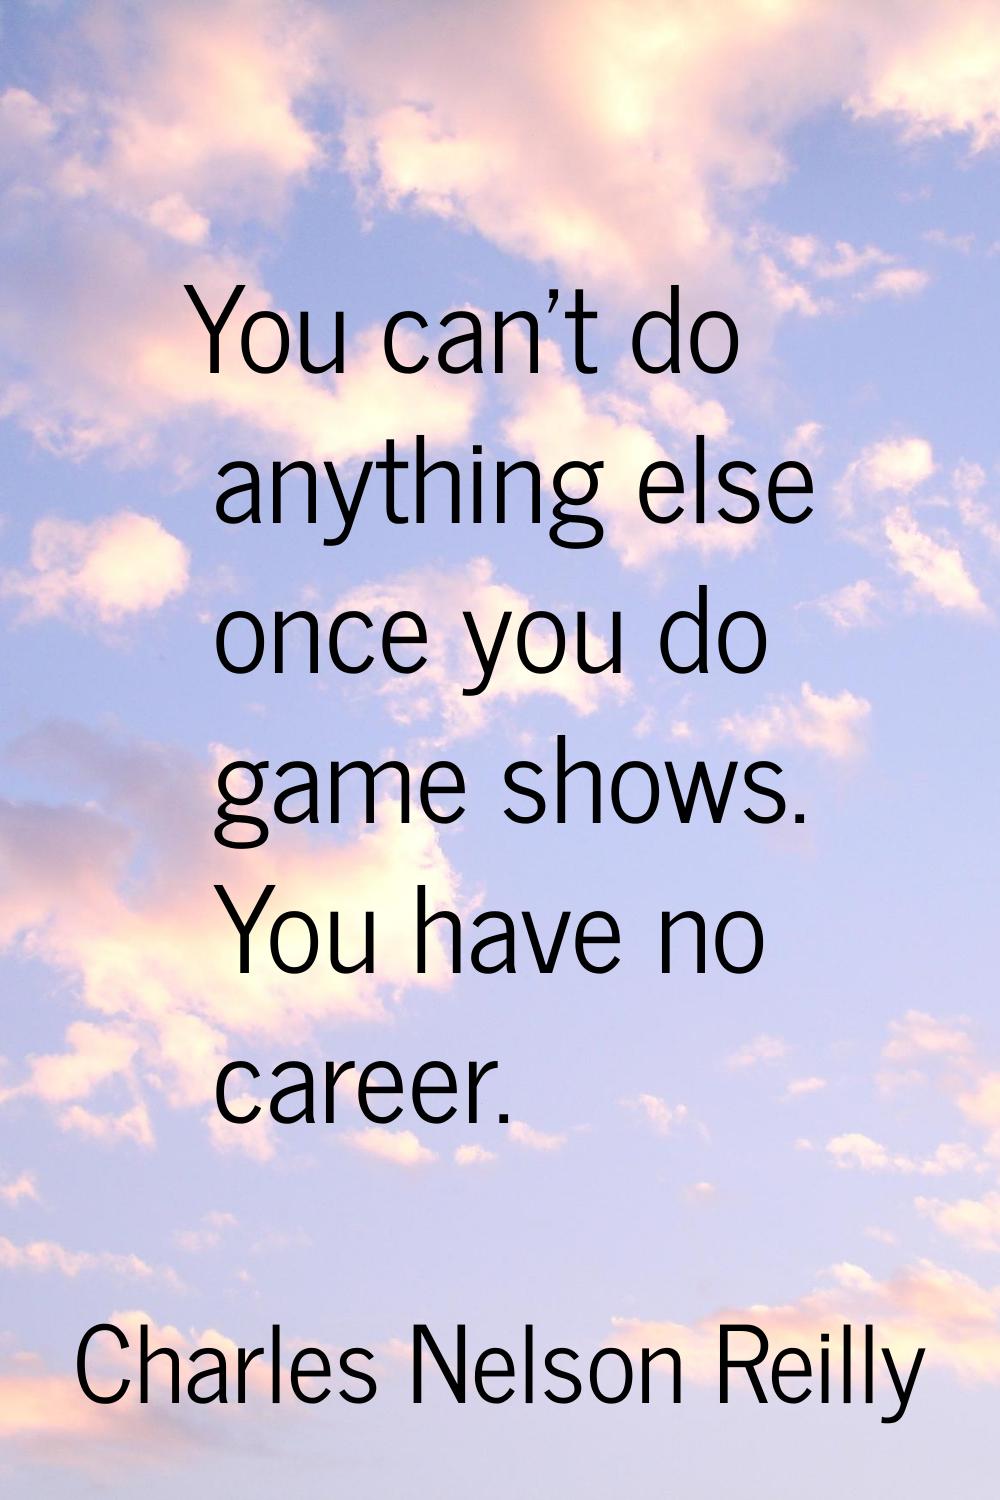 You can't do anything else once you do game shows. You have no career.